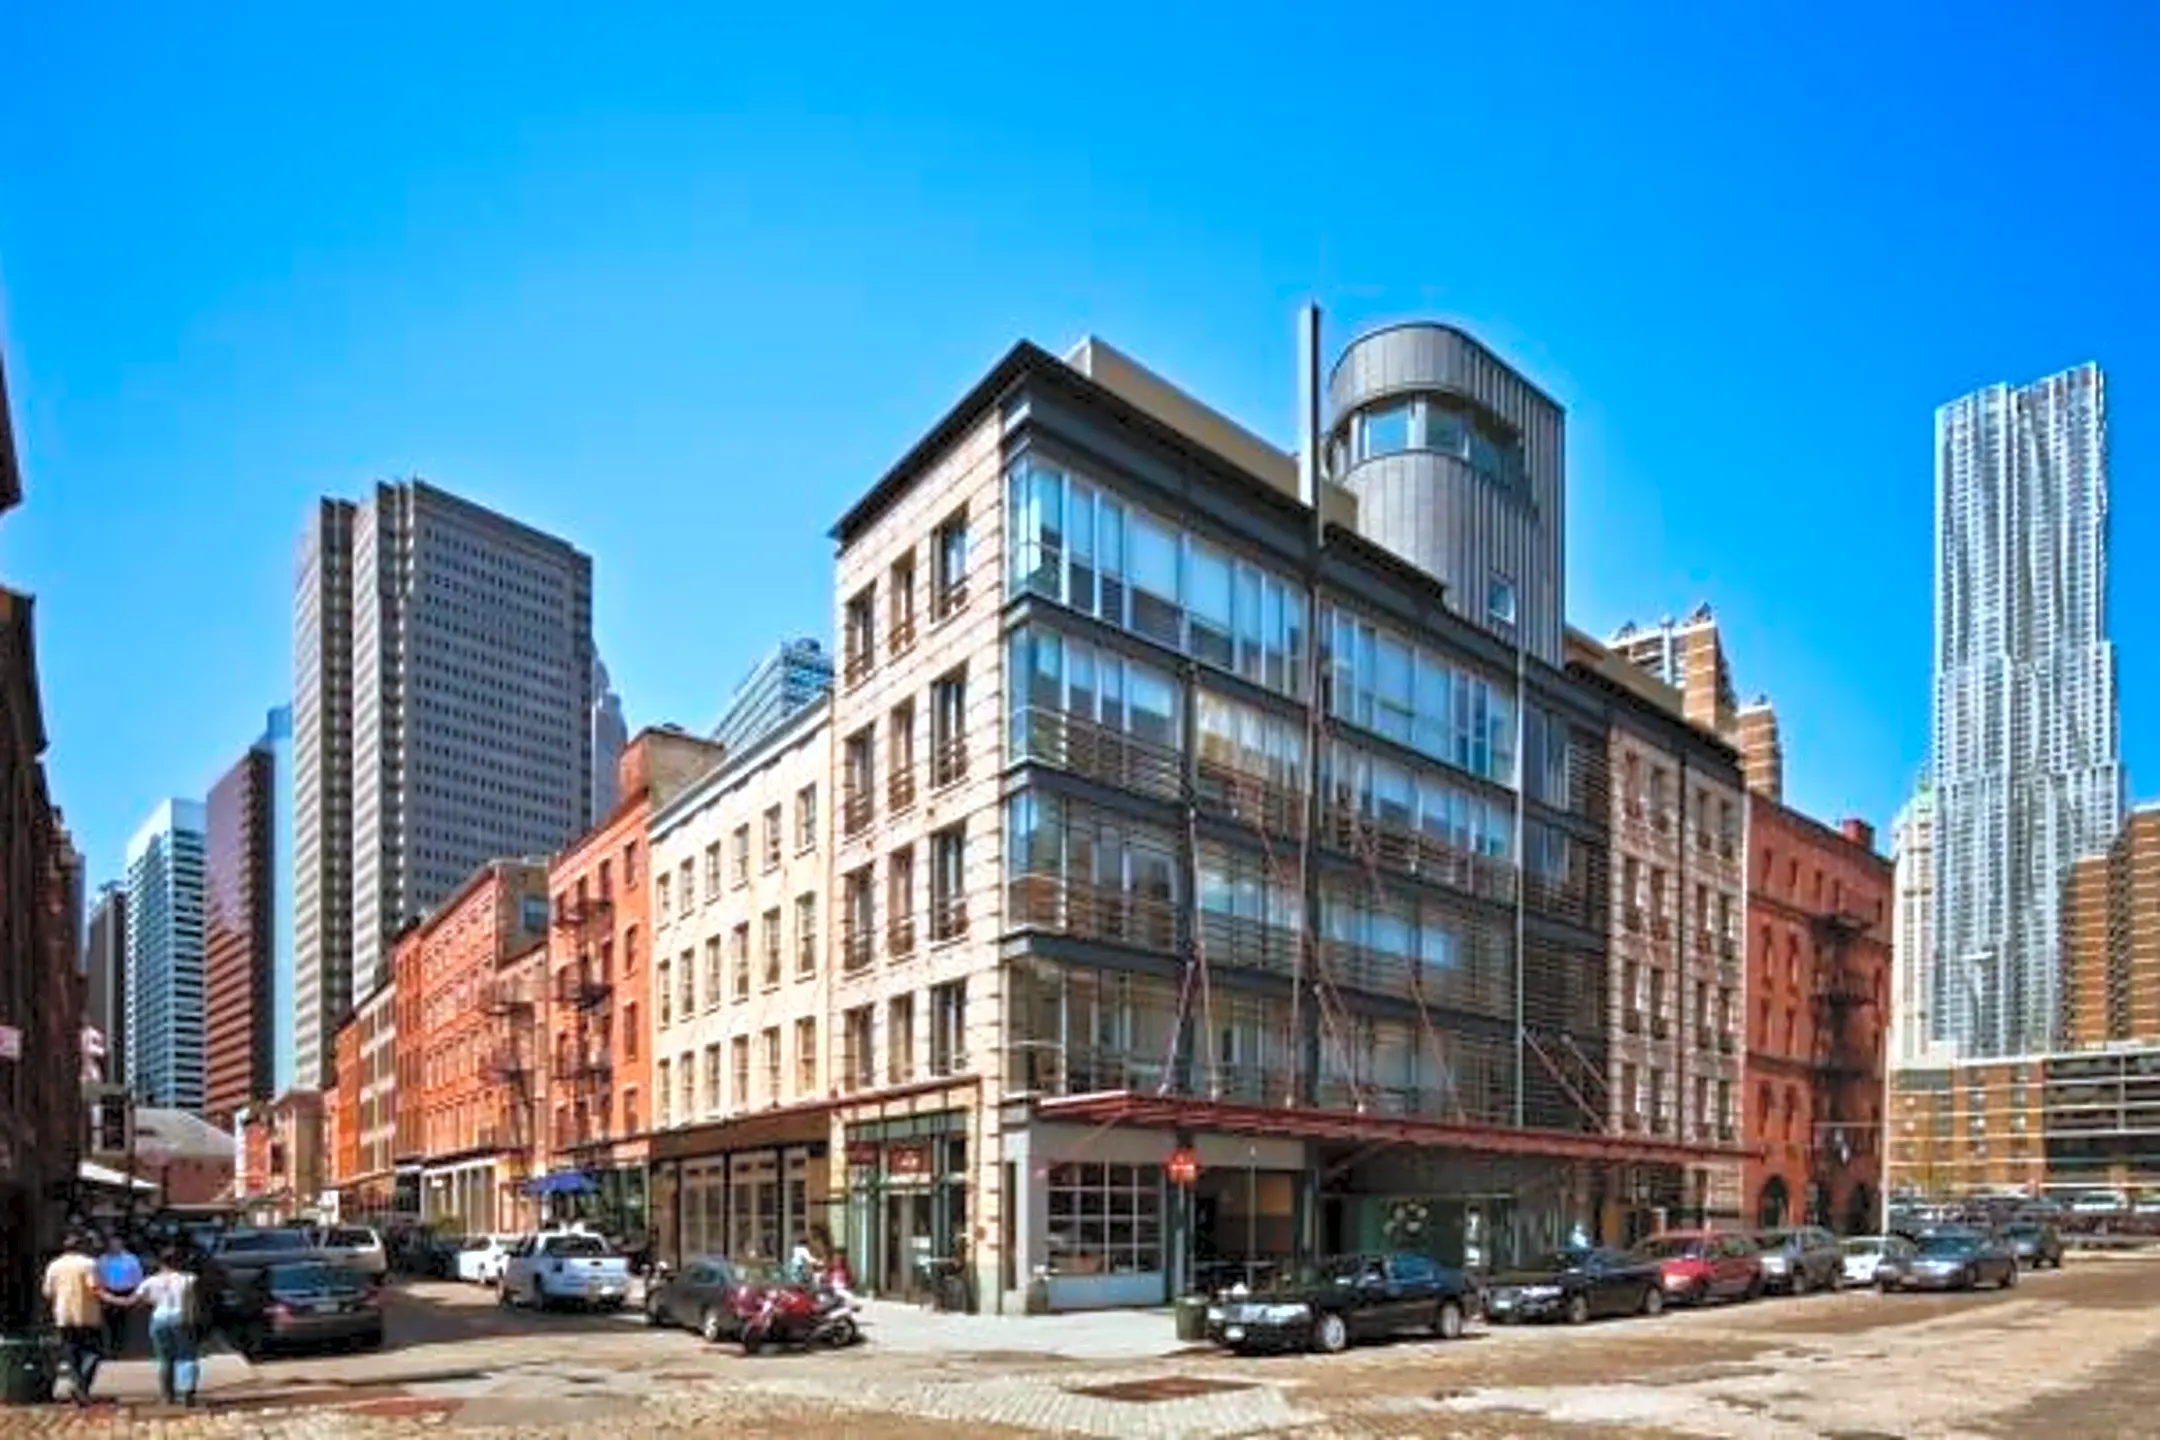 214 Front St | New York, NY Condos for Rent | Rent.